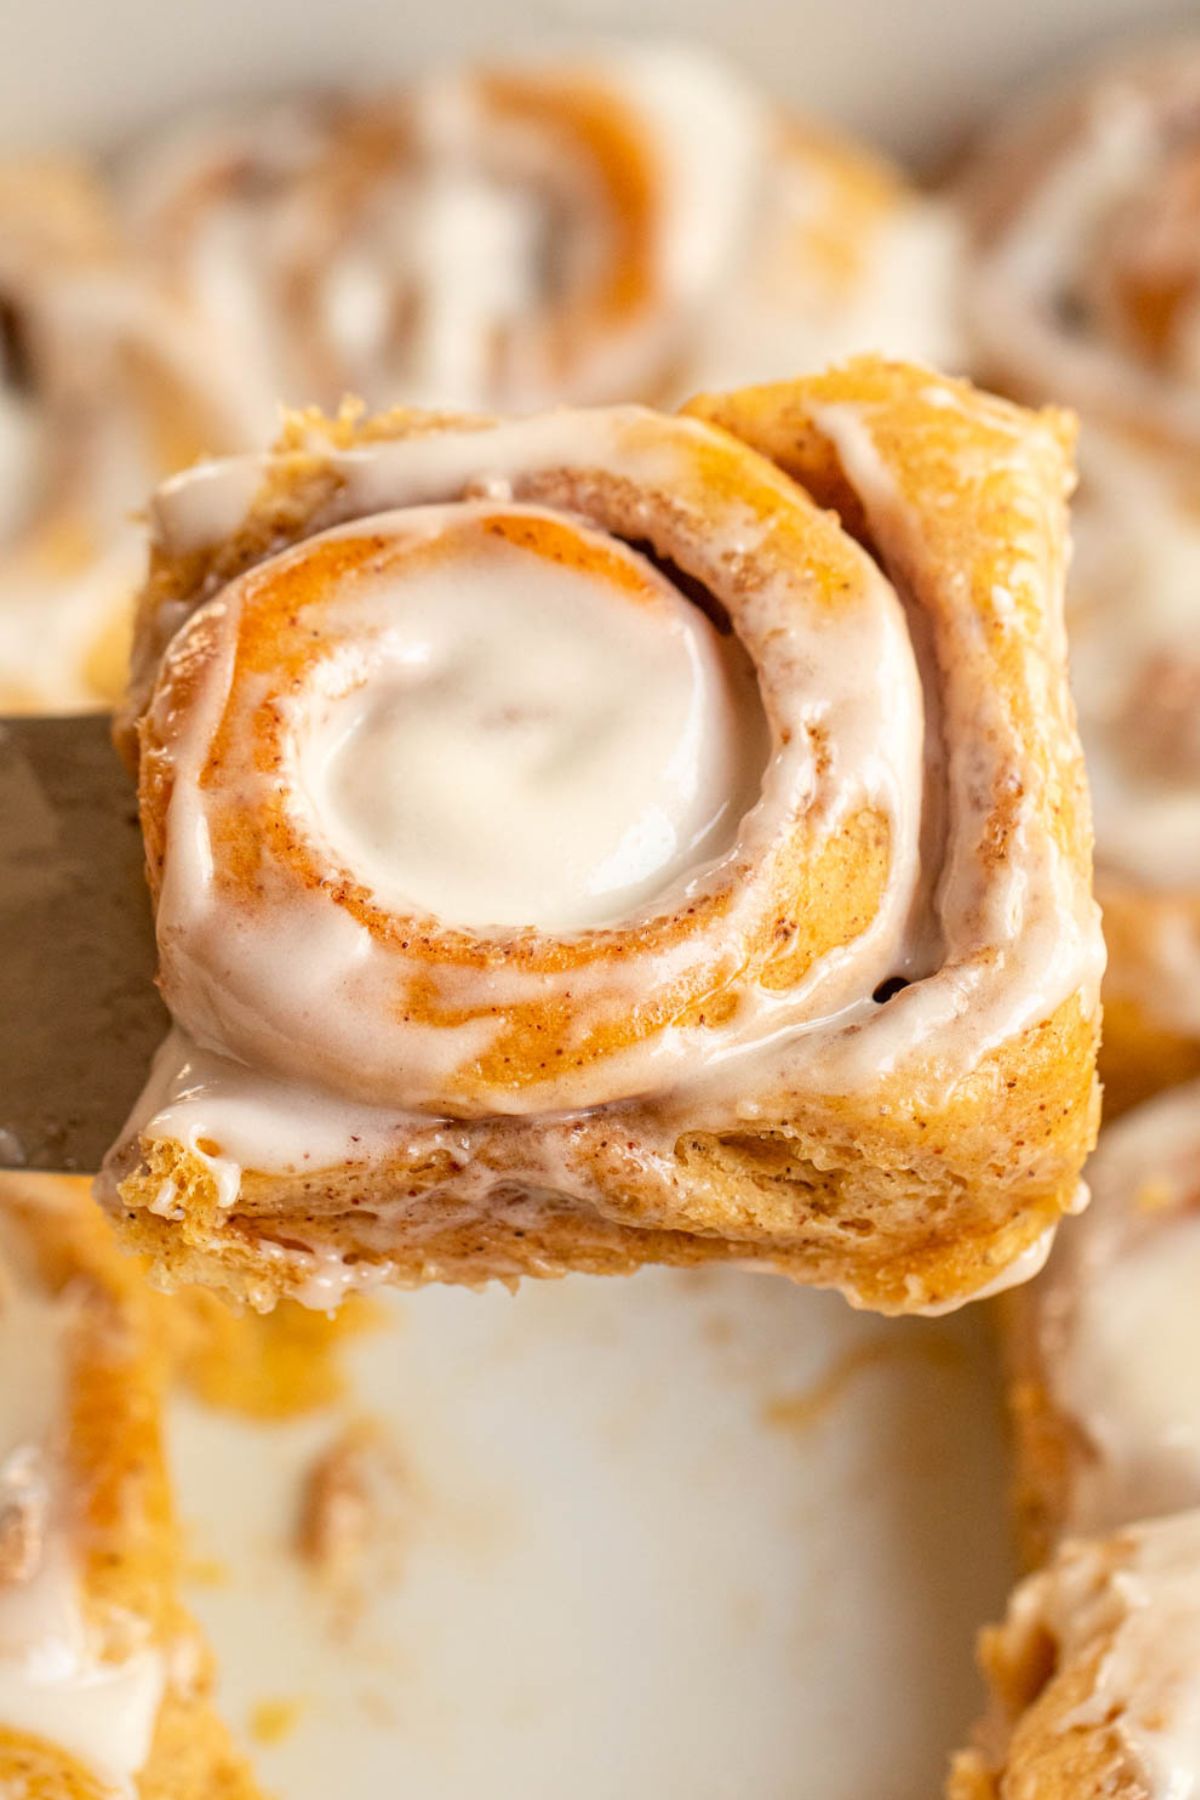 Cinnamon roll pulled out from the pan.